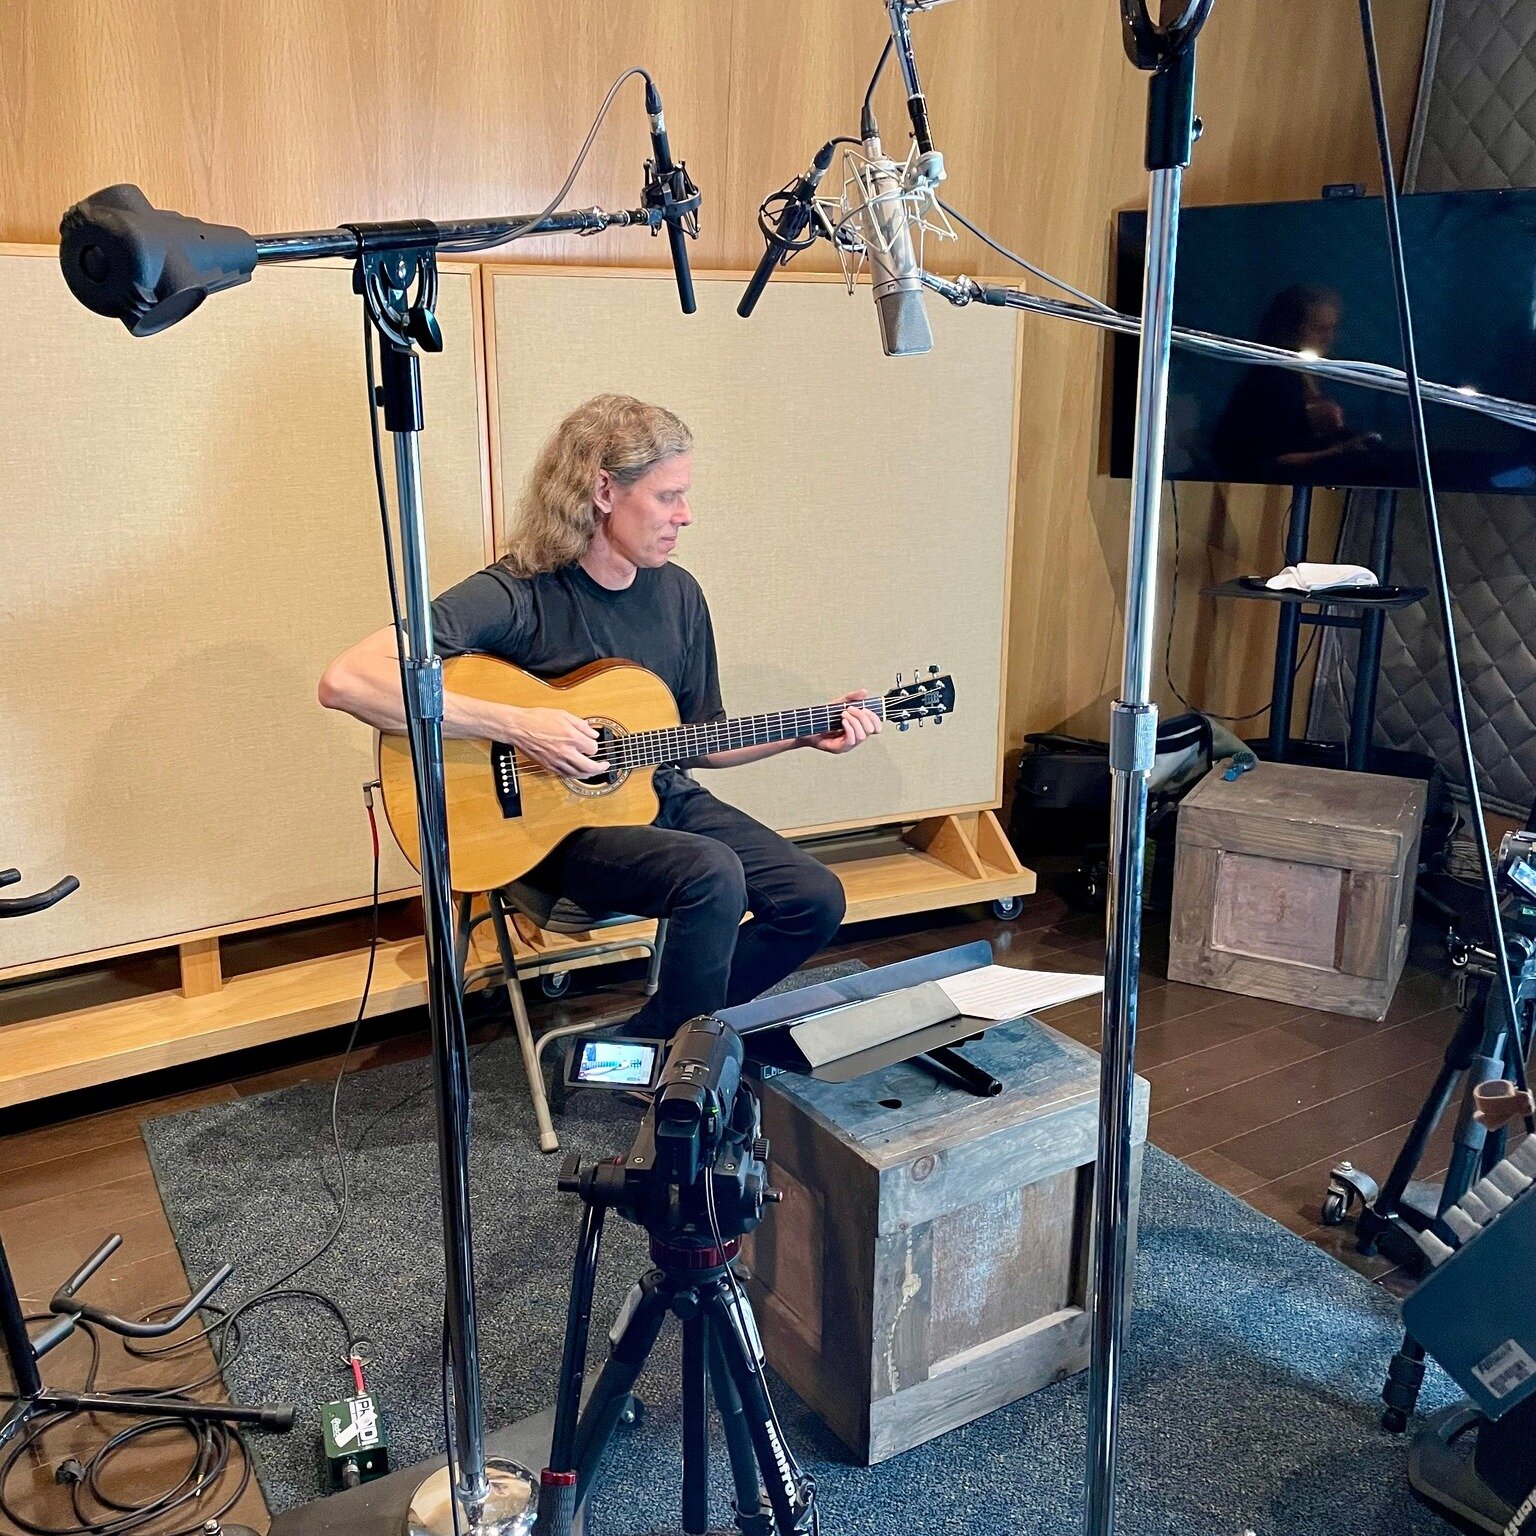 Today's office at @subcatstudios, shooting a new lesson book/video for @acousticguitarmag. Thanks to TJ and Cody for the good work behind the cameras and mics. #guitarteacher #guitarvideo #videoshoot #beyondstrumming